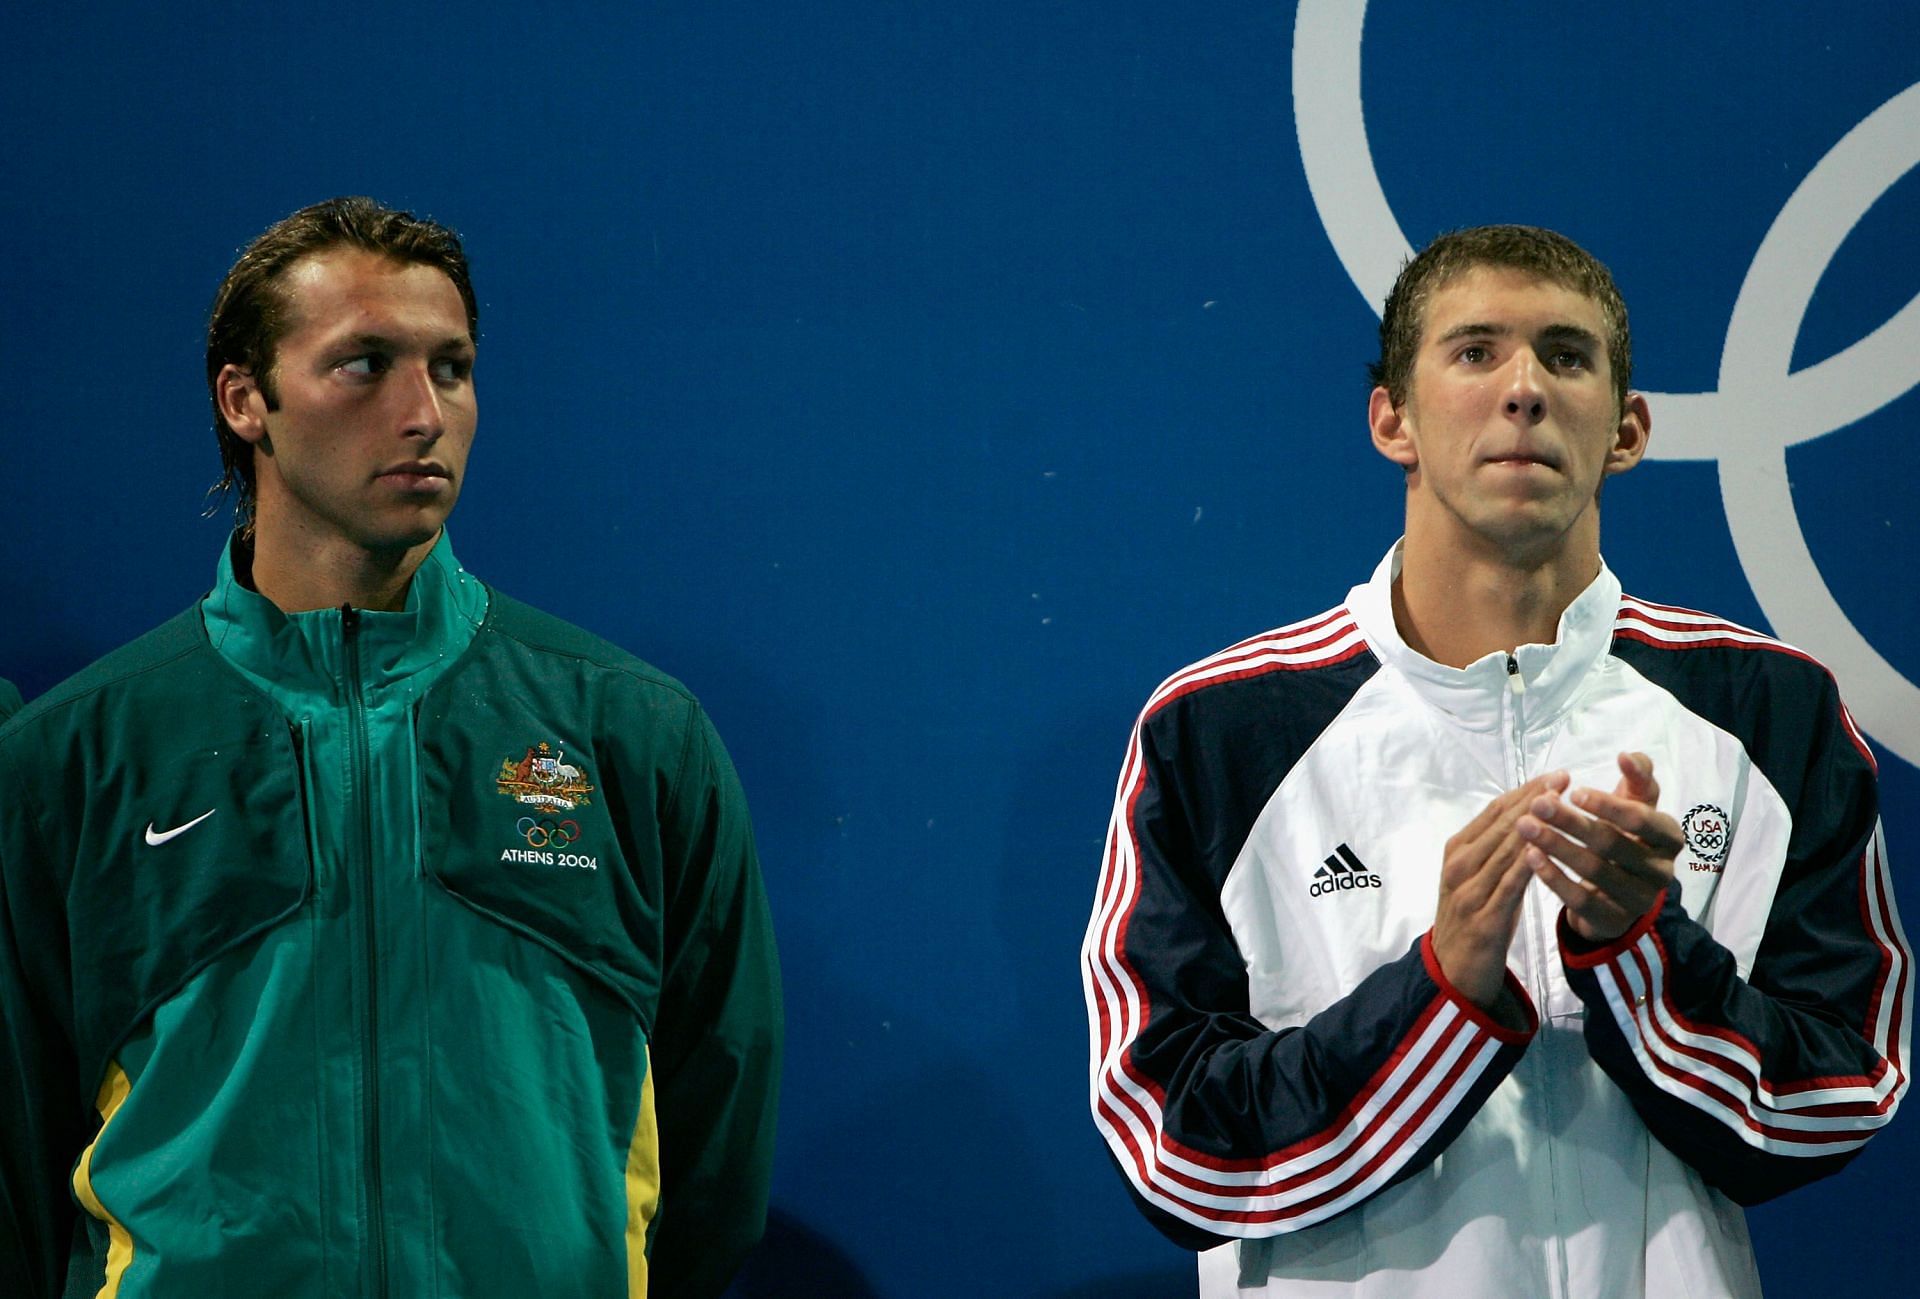 Michael Phelps and Ian Thorpe during the Mens 4x200m Free Relay Medal Ceremony during the 2004 Olympics